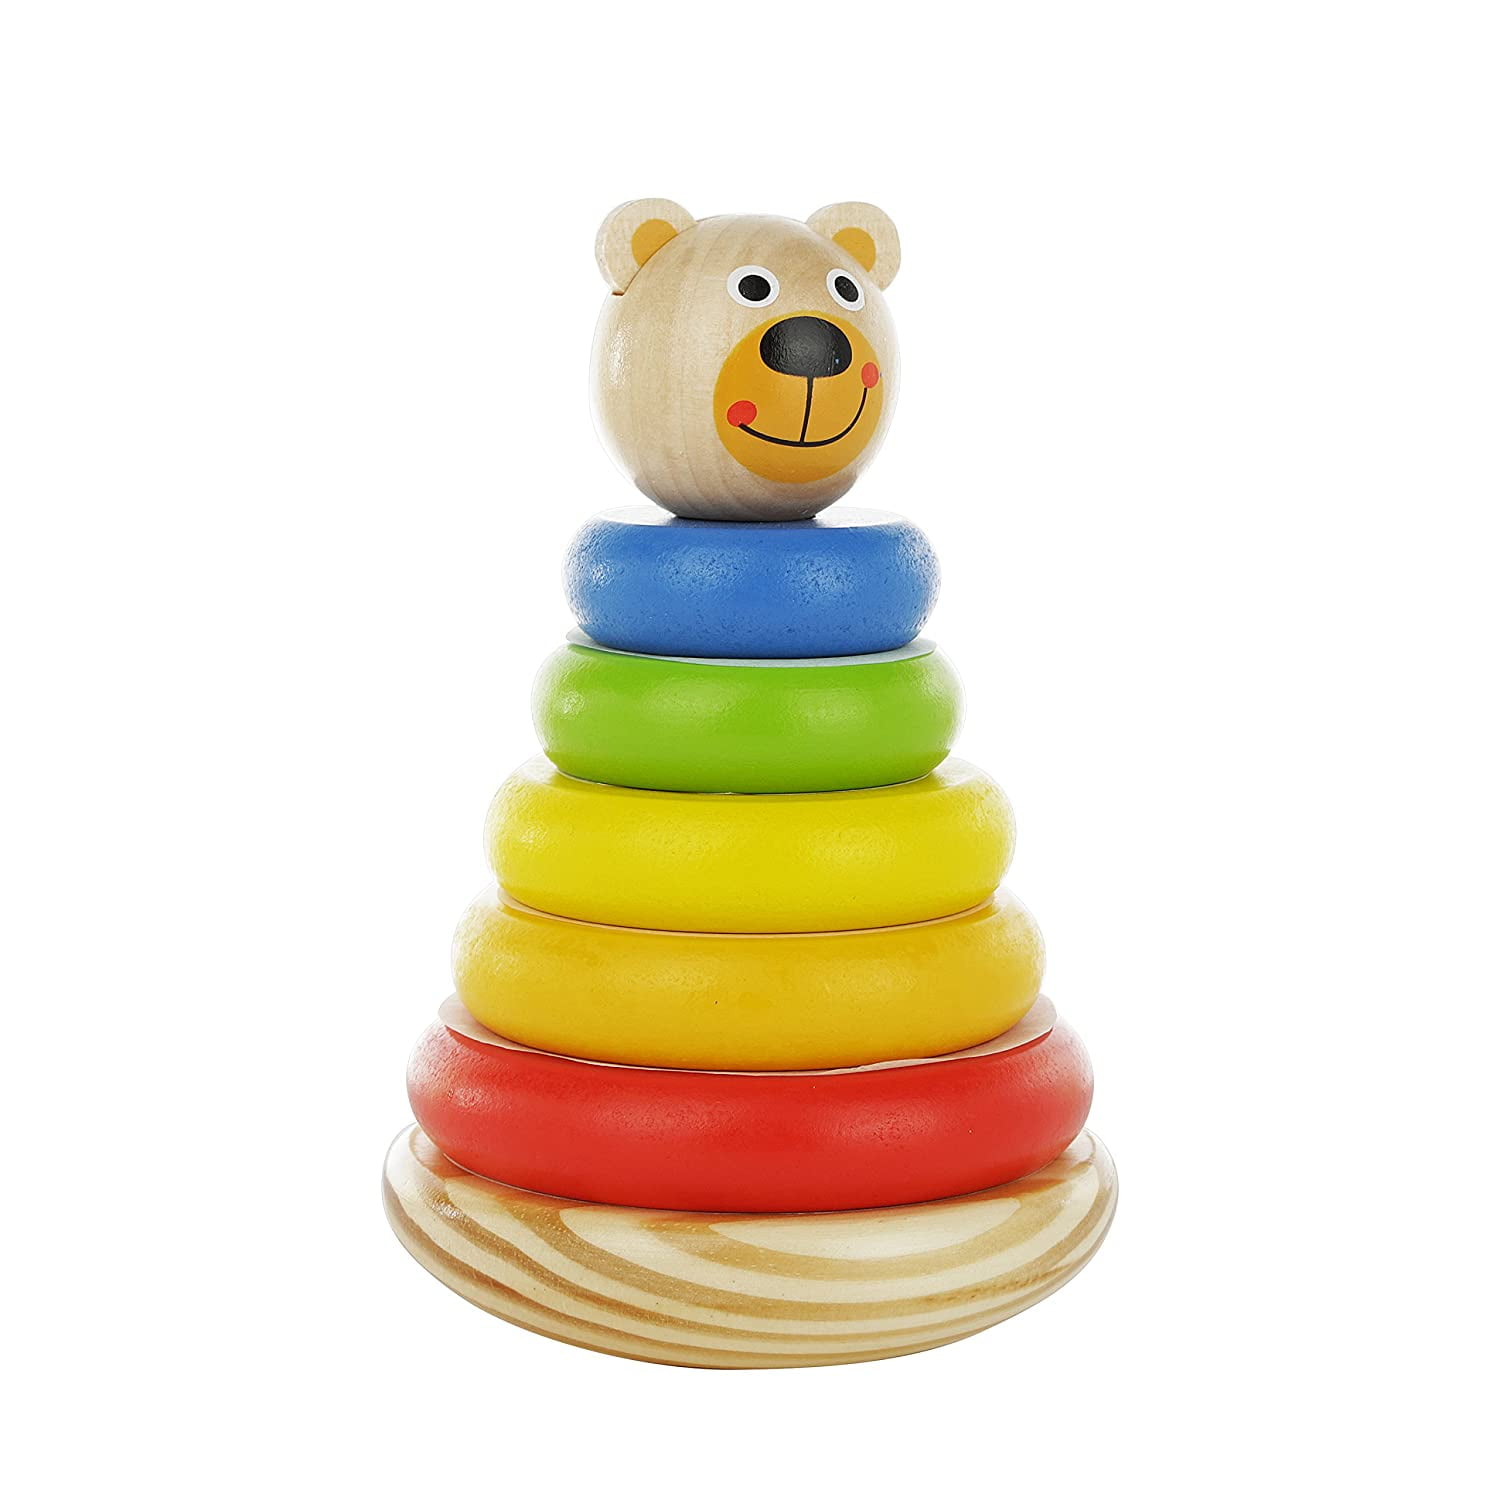 Details about   Vintage Fisher Price Rock-A-Stack Replacement Yellow Ring Stacking Rings 